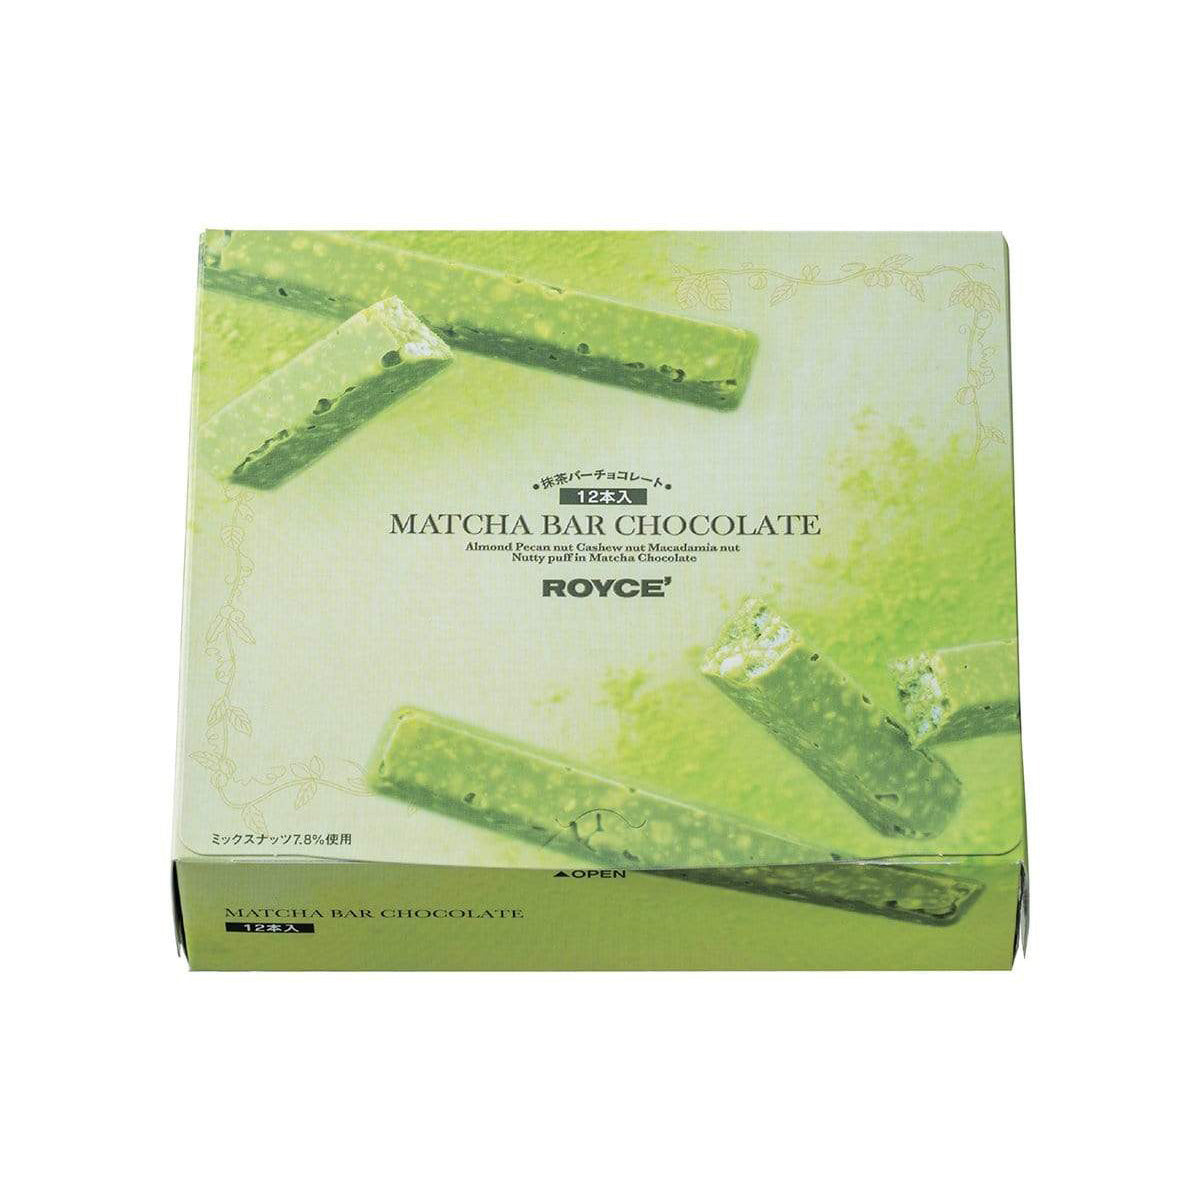 ROYCE' Chocolate - Matcha Bar Chocolate - Image shows a green box with pictures of green chocolate bars. Text in the middle says Matcha Bar Chocolate Almond Pecan nut Cashew nut Macadamia nut Nutty puff in Matcha Chocolate. ROYCE'.